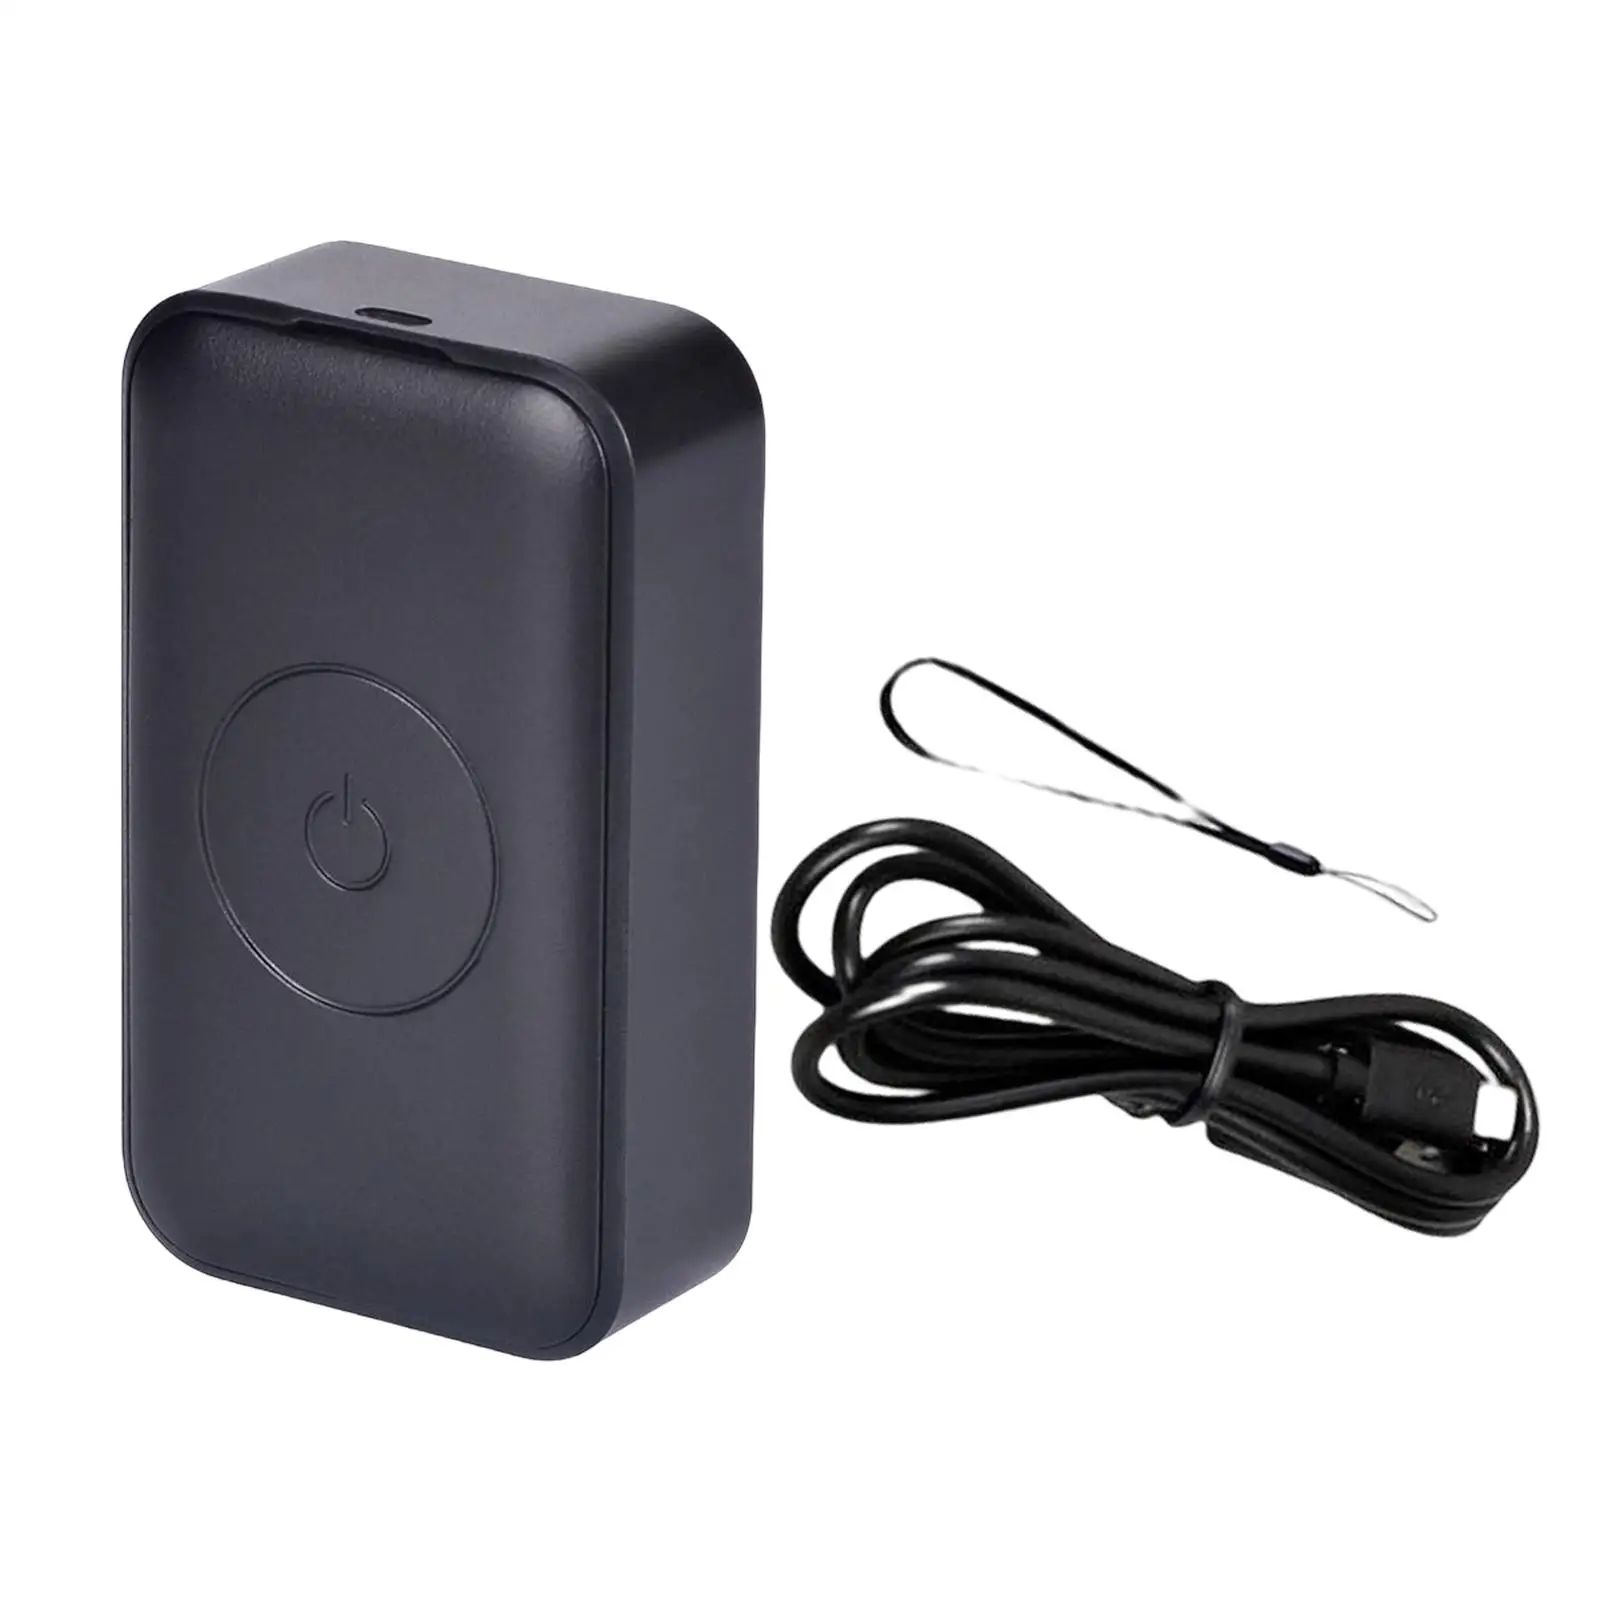 G03 GPS Tracker Voice Recording Voice Monitor Portable Geo-Fence for Car